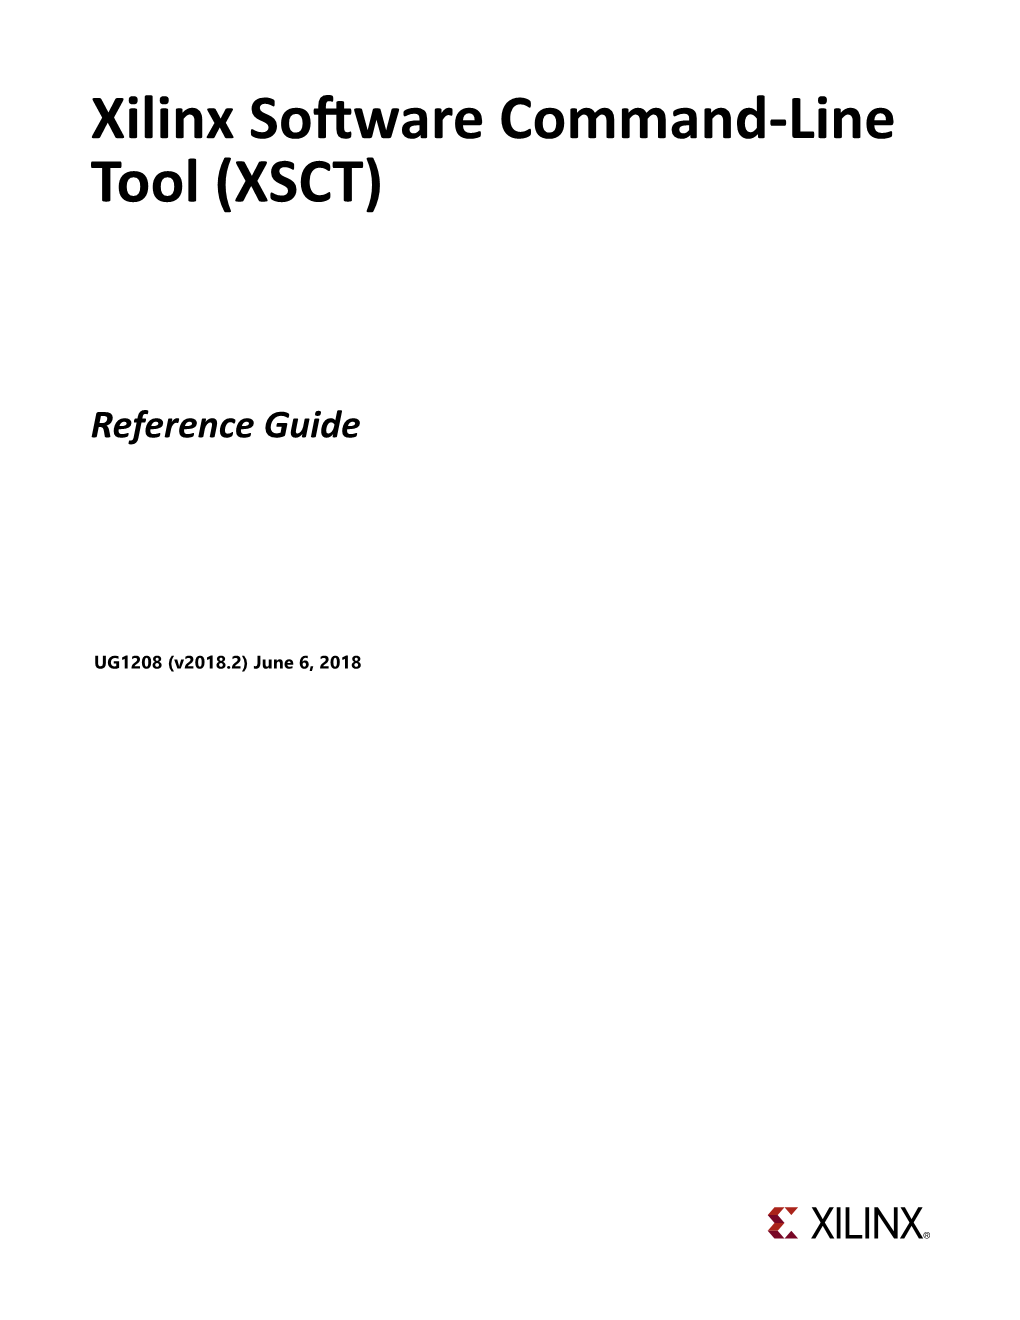 Xilinx Software Command-Line Tools (XSCT): Reference Guide (UG1208)